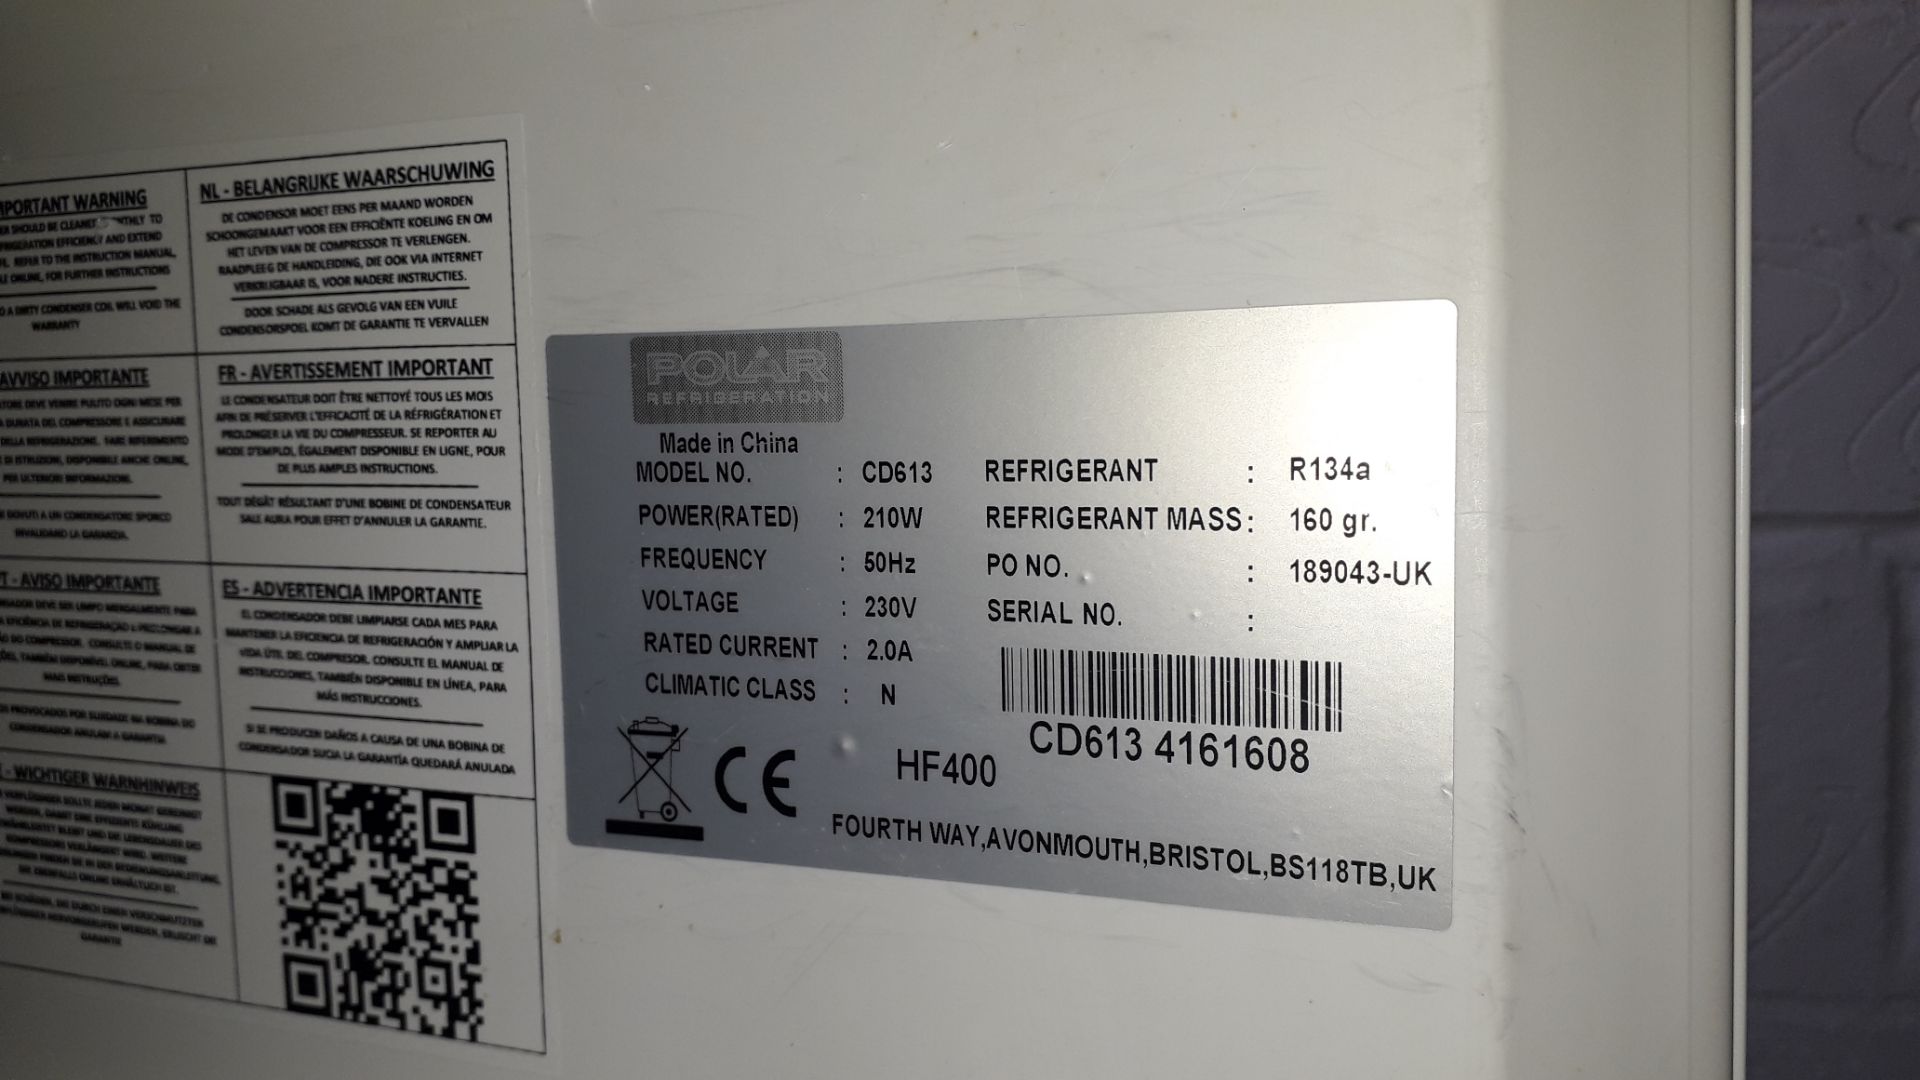 Polar CD613 Single Door 365Ltr Upright Freezer Serial Number 416108 1800 x 600. Located at Fresco' - Image 3 of 3